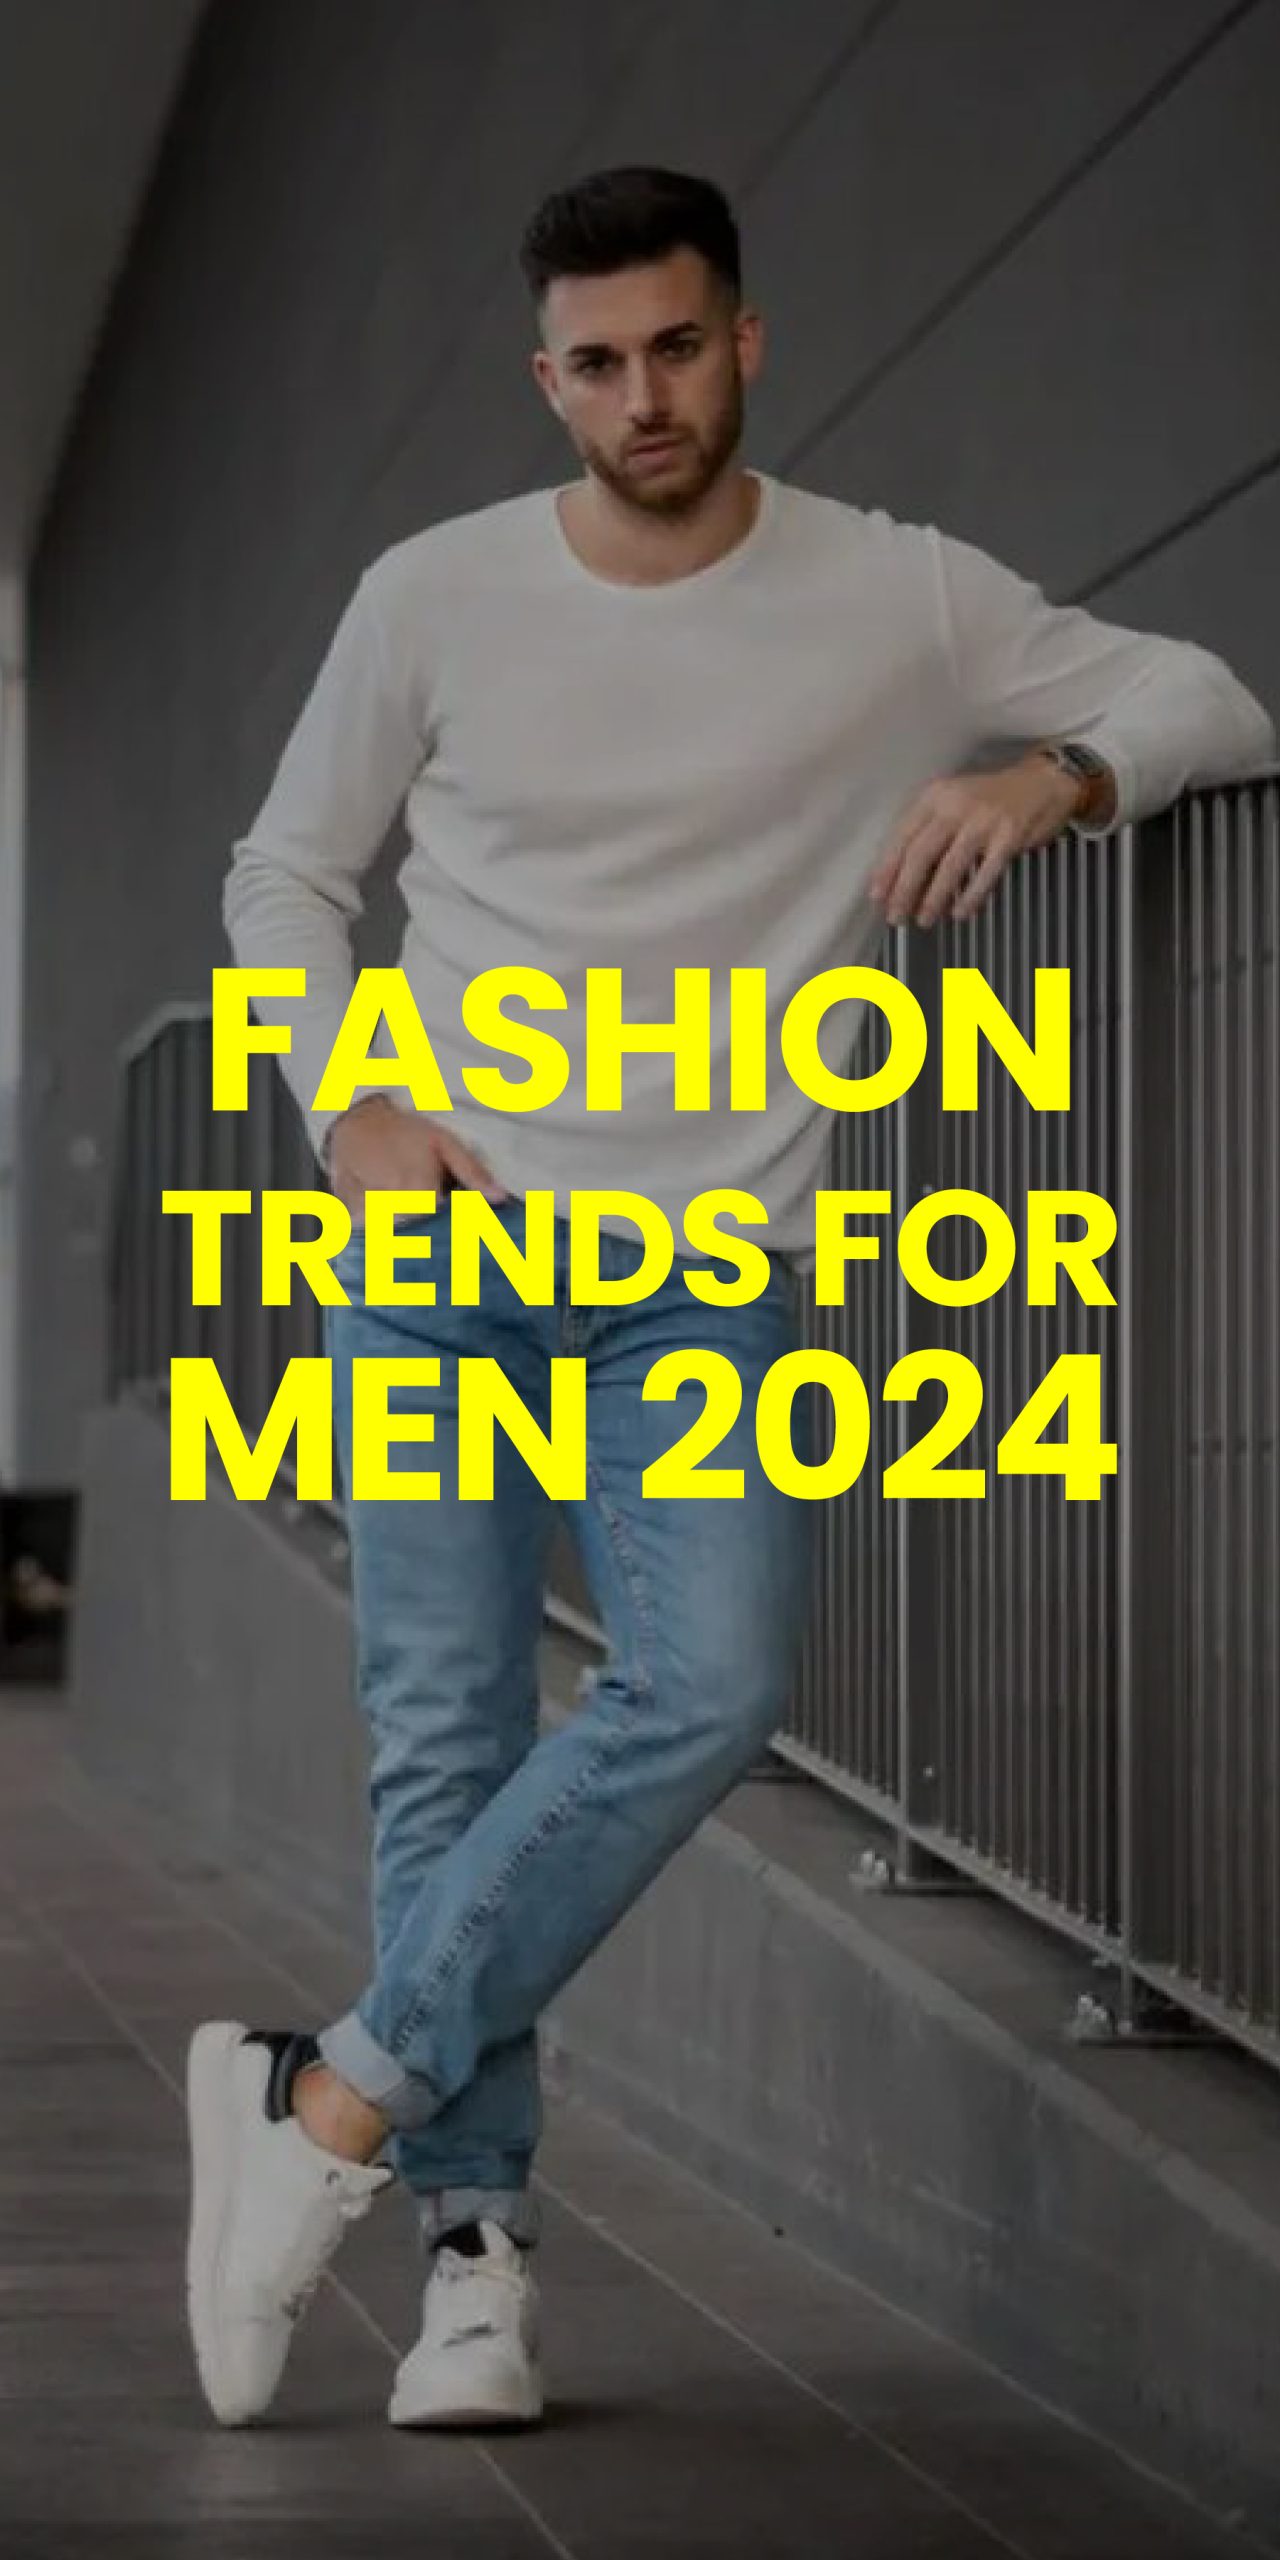 FASHION TRENDS FOR MEN 2024